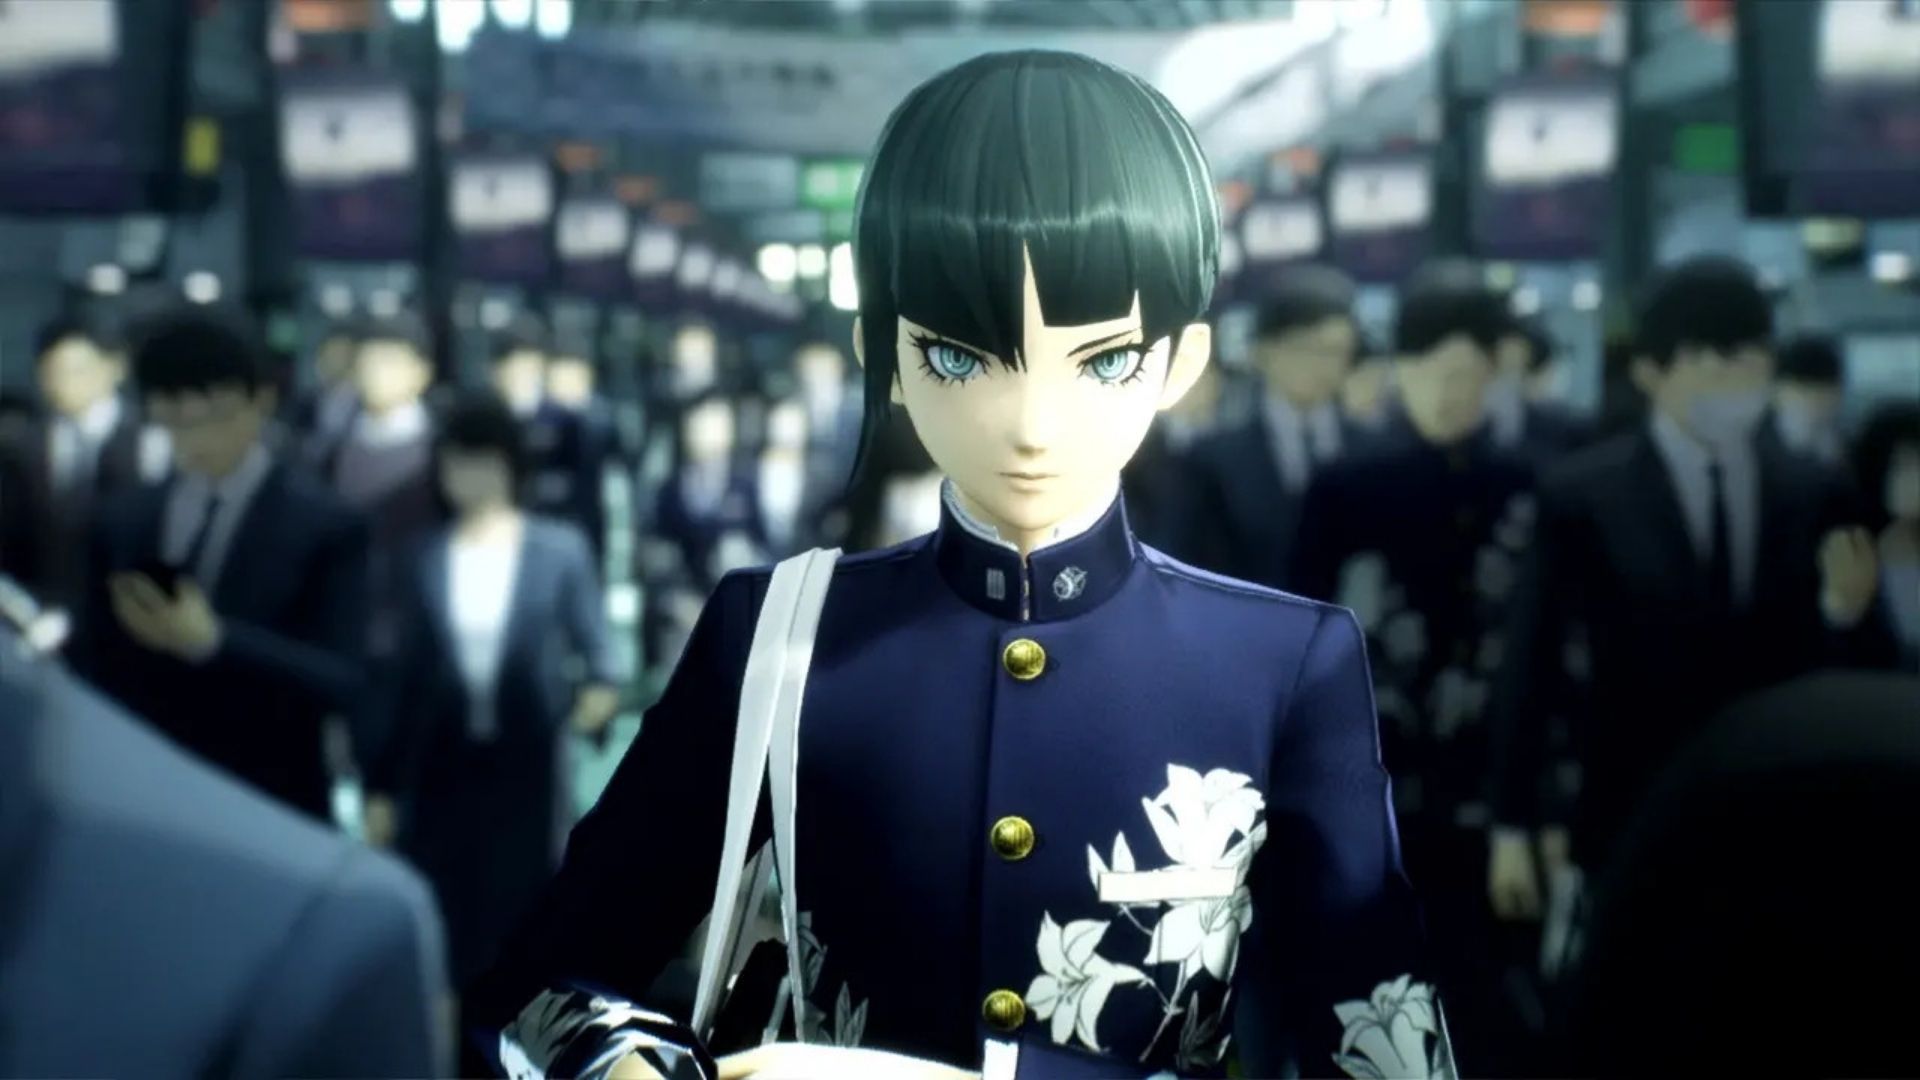 Screenshot from Shin Megami Tensei V, a game like Pokémon, showing a woman in stylish, smart clothes walking through a crowded station.